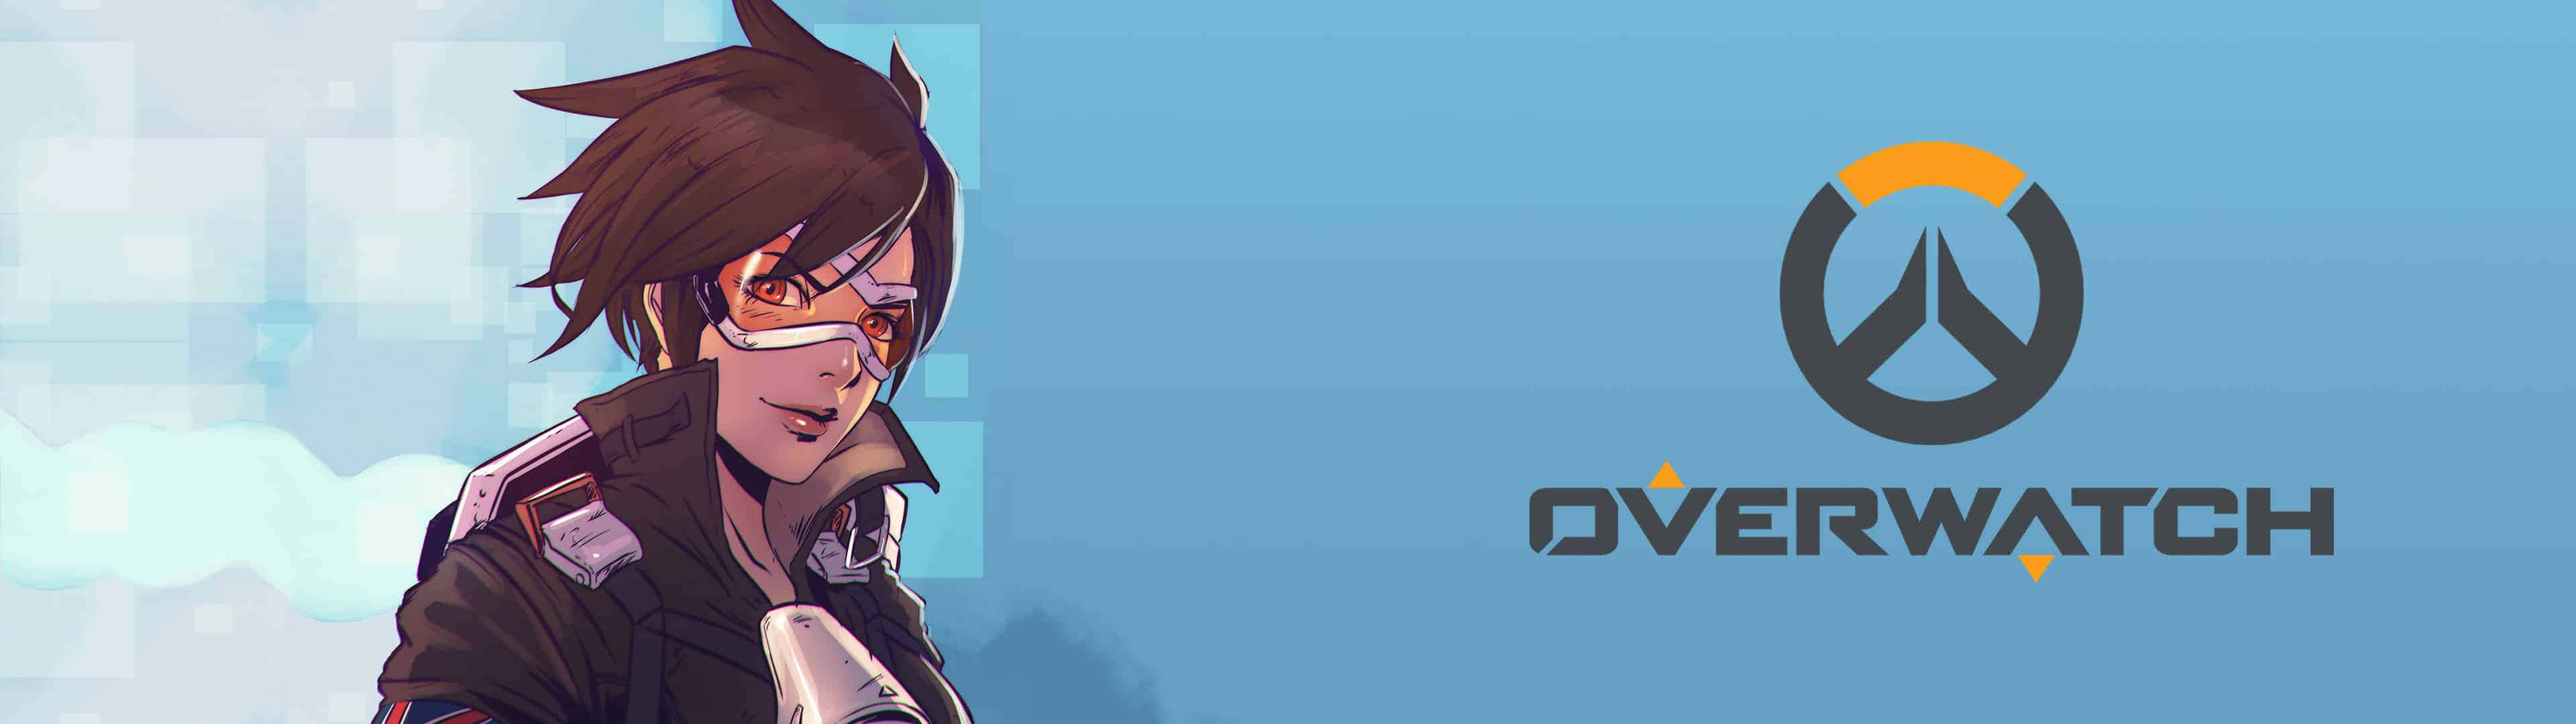 Overwatch - A Girl With Glasses And A Blue Background Wallpaper